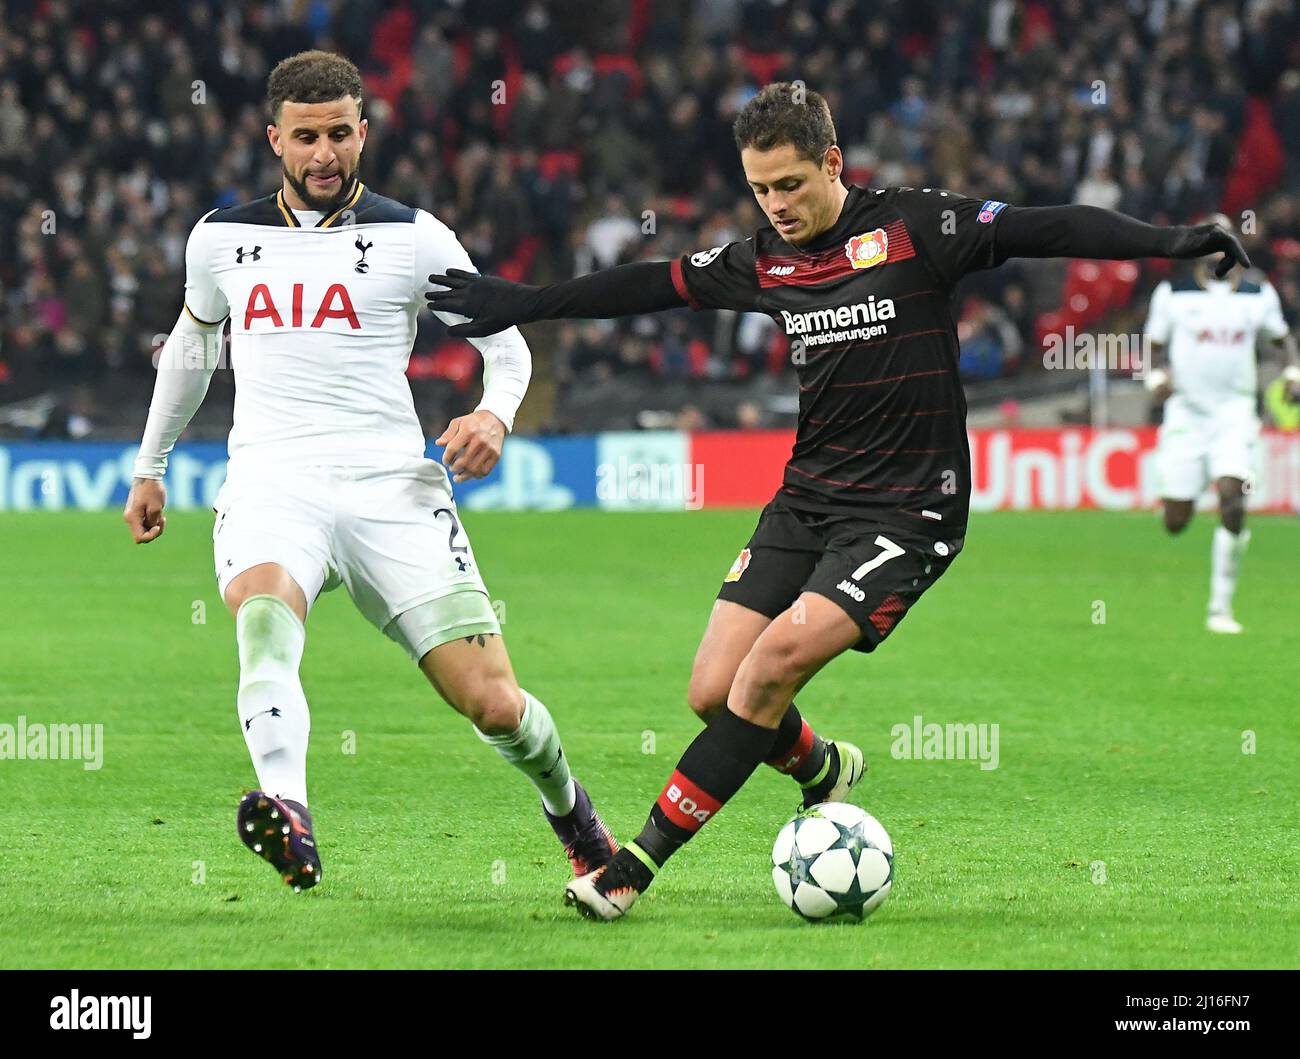 LONDON, ENGLAND - NOVEMBER 2, 2016: Kyle Walker (L) of Tottenham and Javier Hernandez (R) of Leverkusen pictured in action during the UEFA Champions League Group E game between Tottenham Hotspur and Bayern Leverkusen at Wembley Stadium. Copyright: Cosmin Iftode/Picstaff Stock Photo